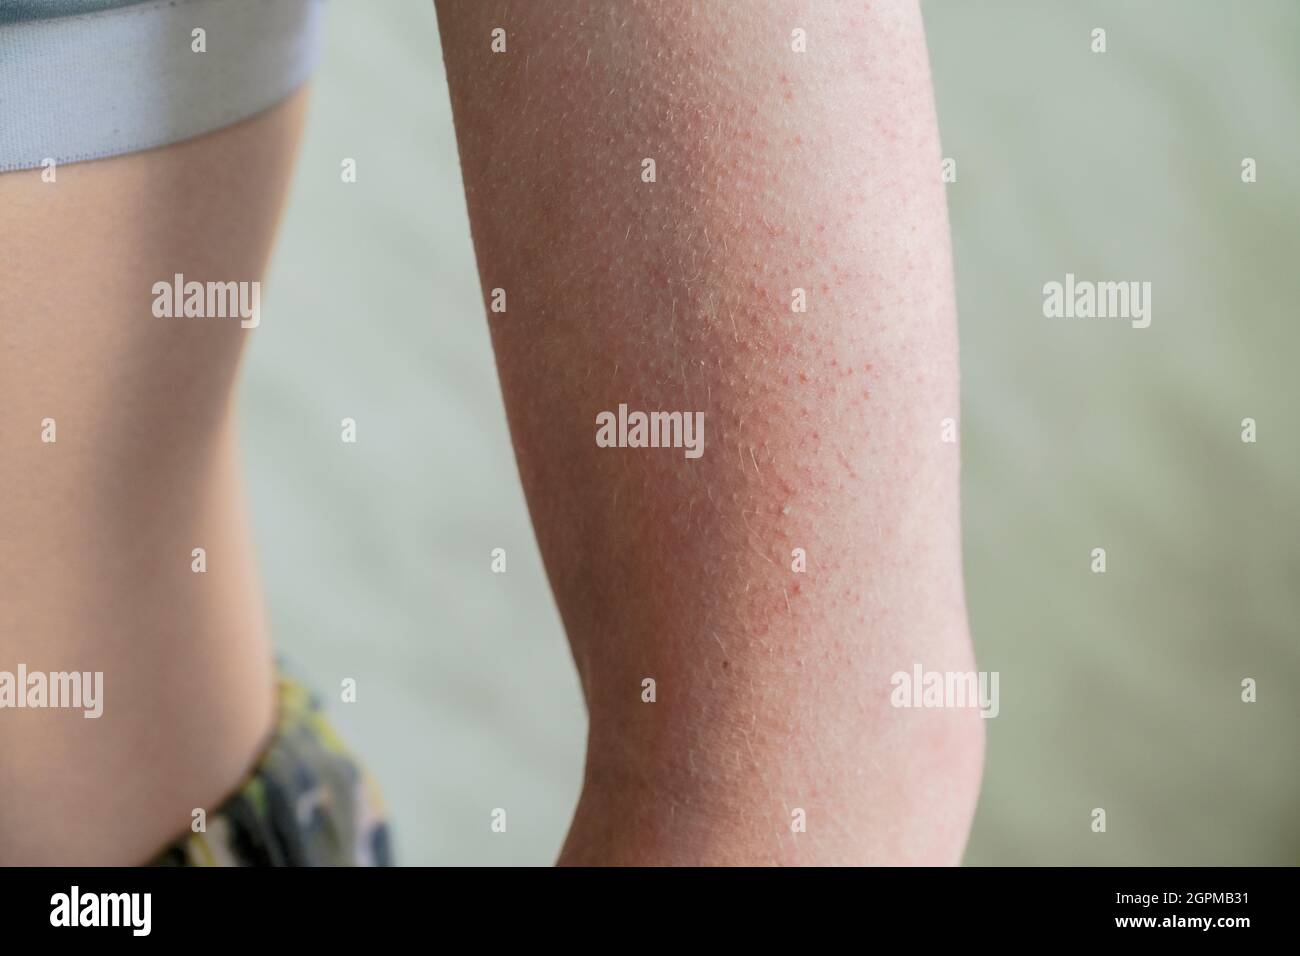 follicular hyperkeratosis is located on the person's arm. Stock Photo